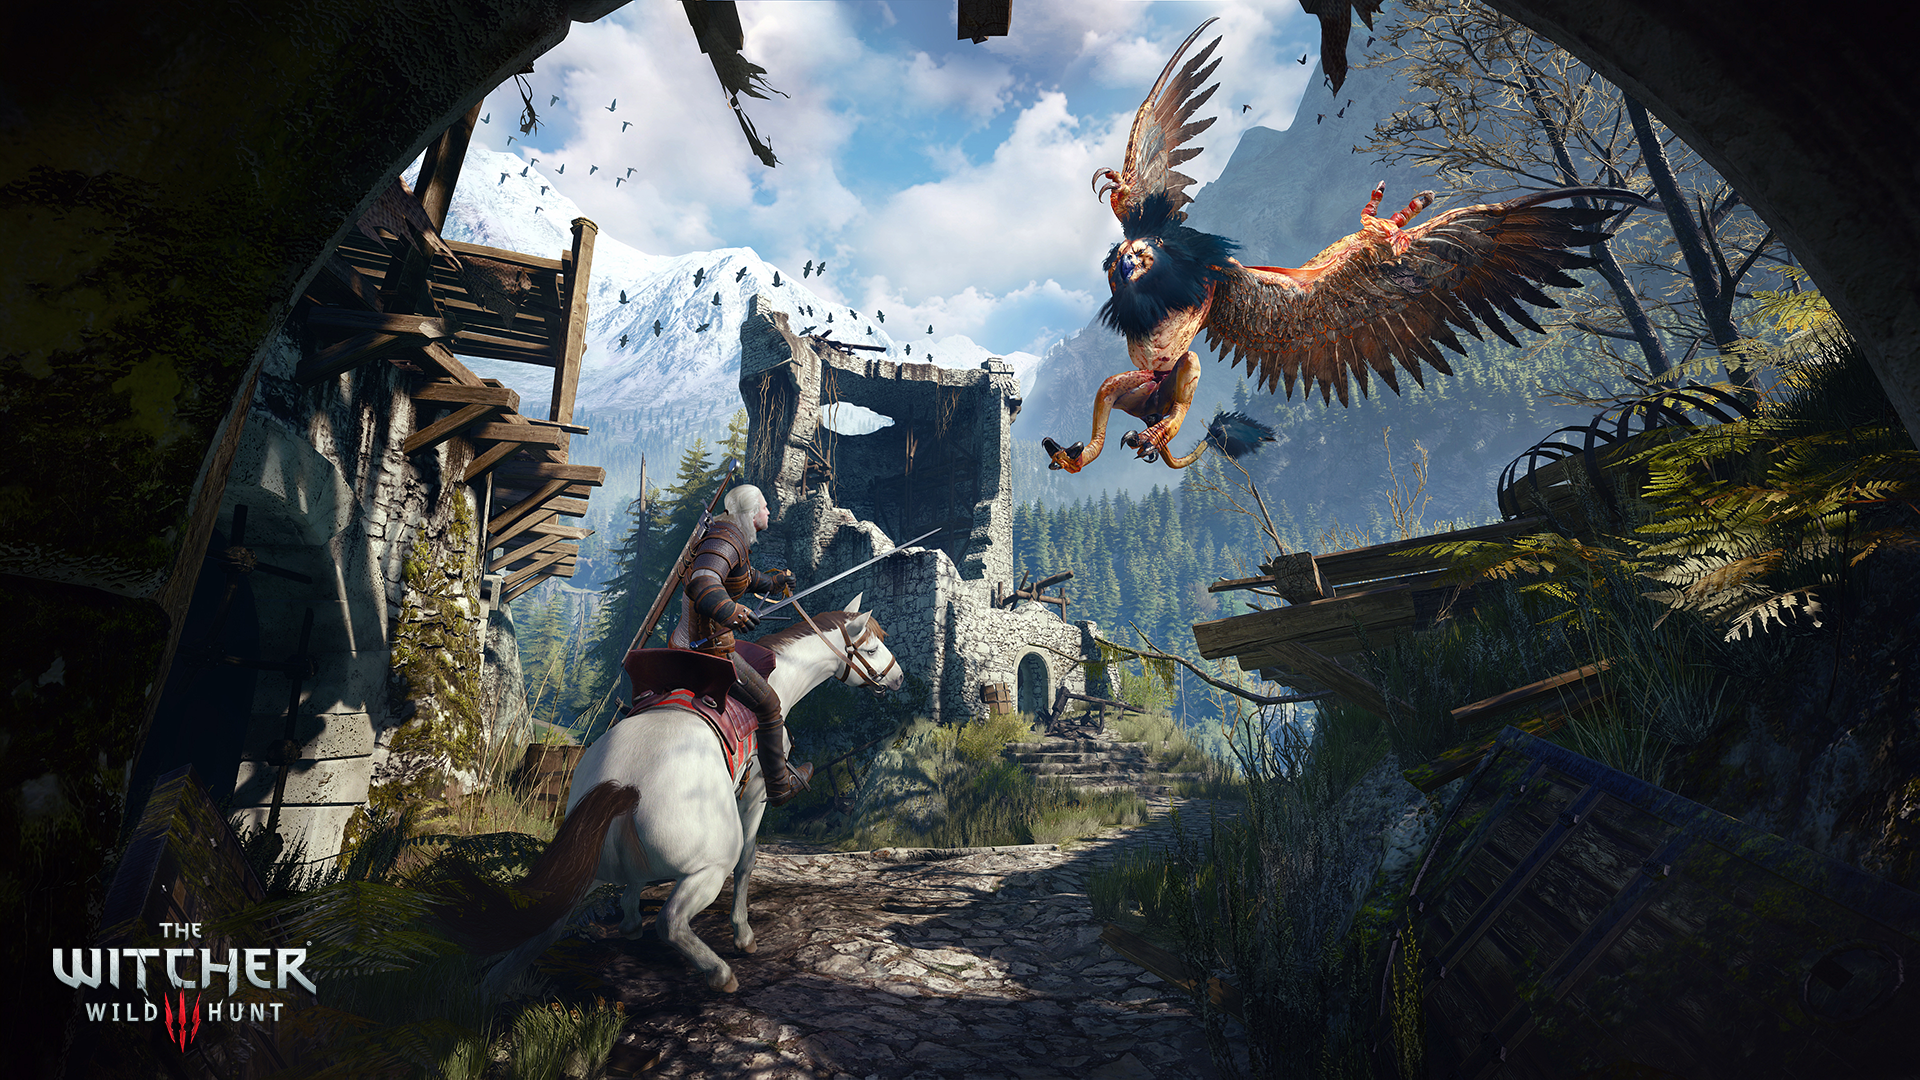 The Witcher S Remended Specs Are Only For Mid High Settings At